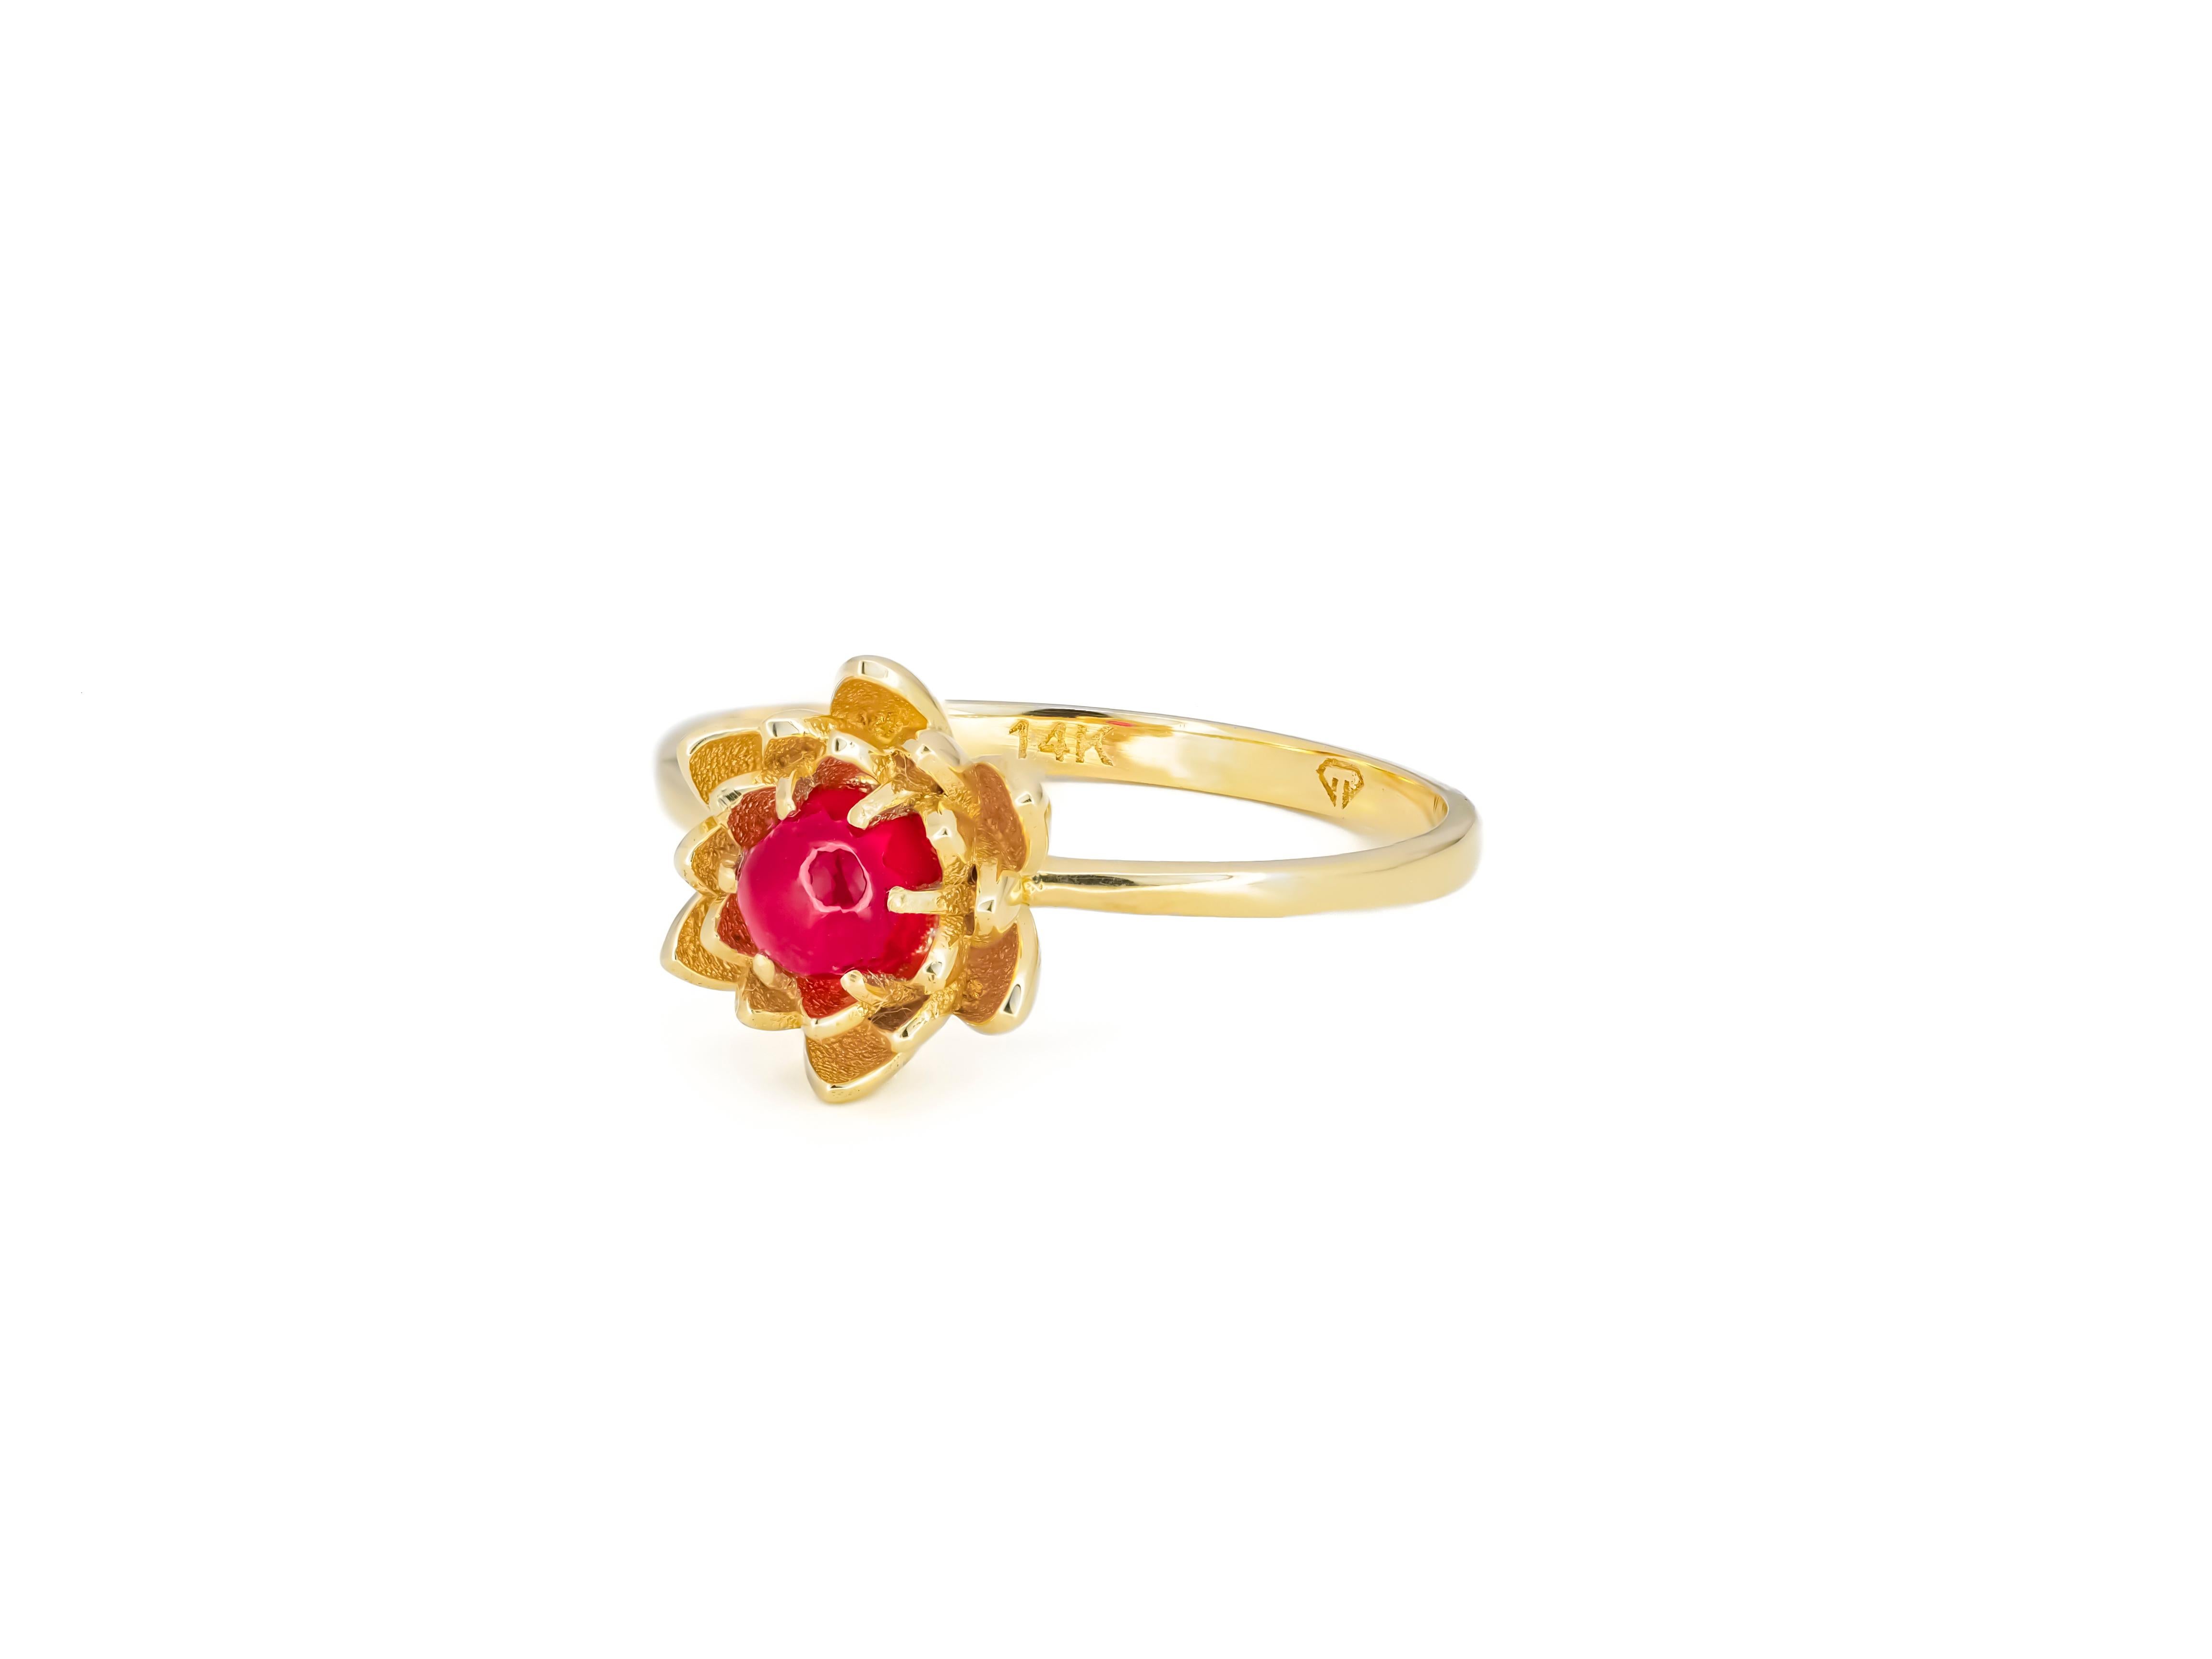 Cabochon Ruby gold ring in 14k gold.  For Sale